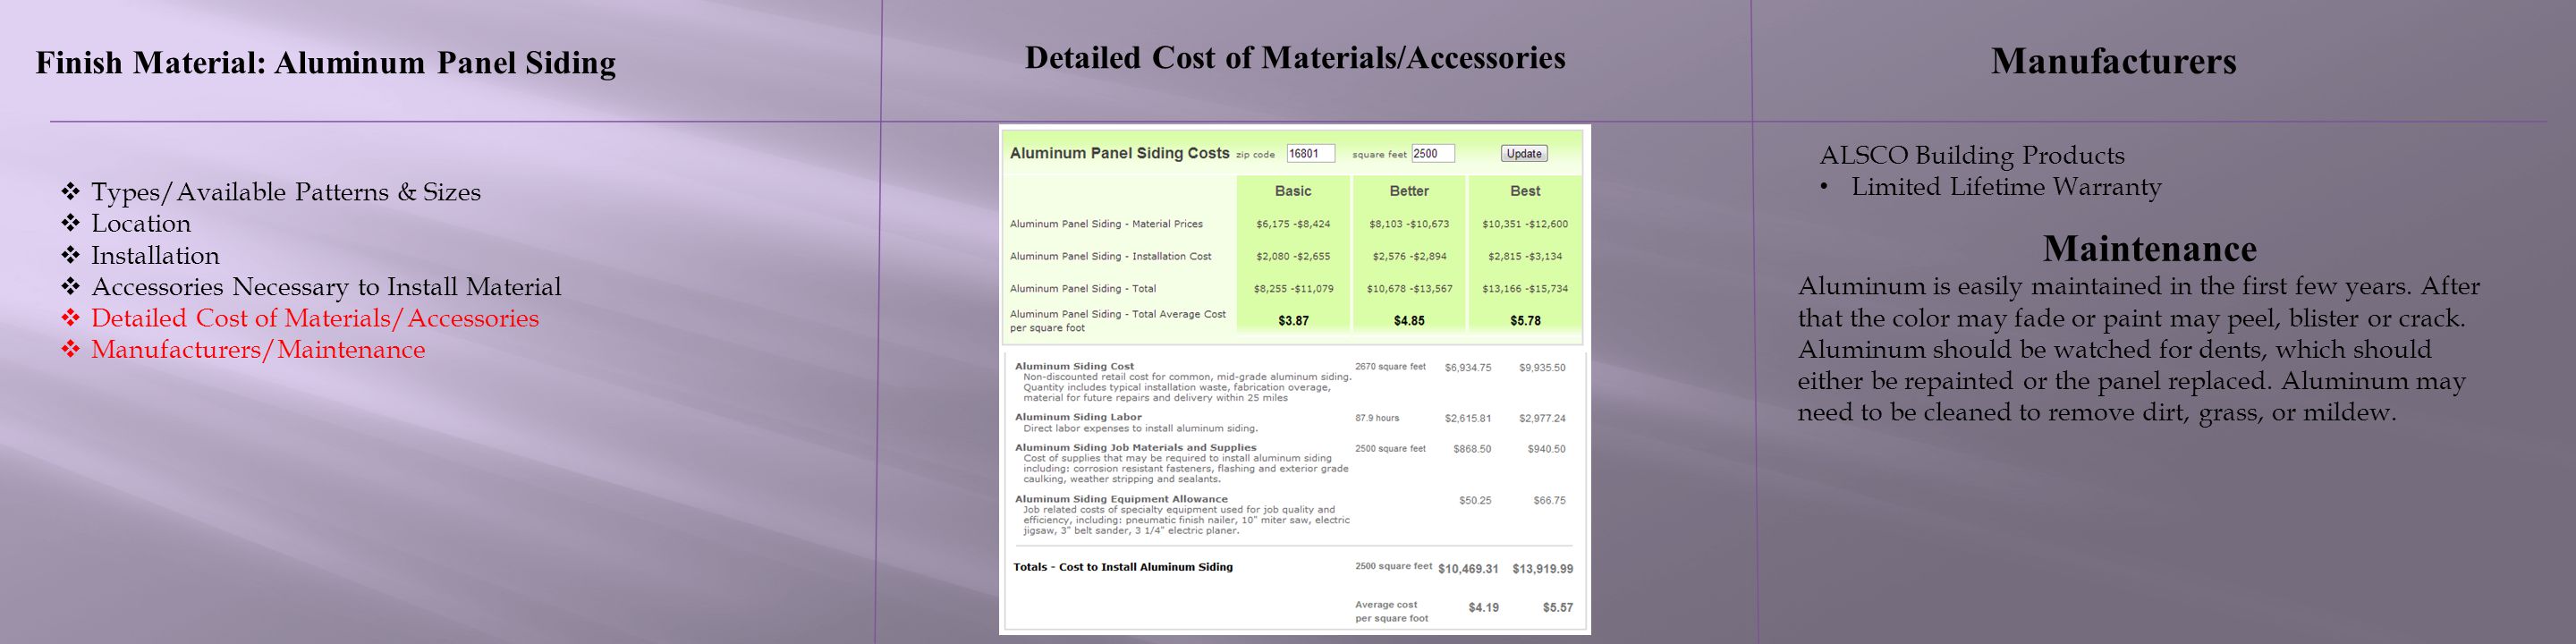 Detailed Cost of Materials/Accessories